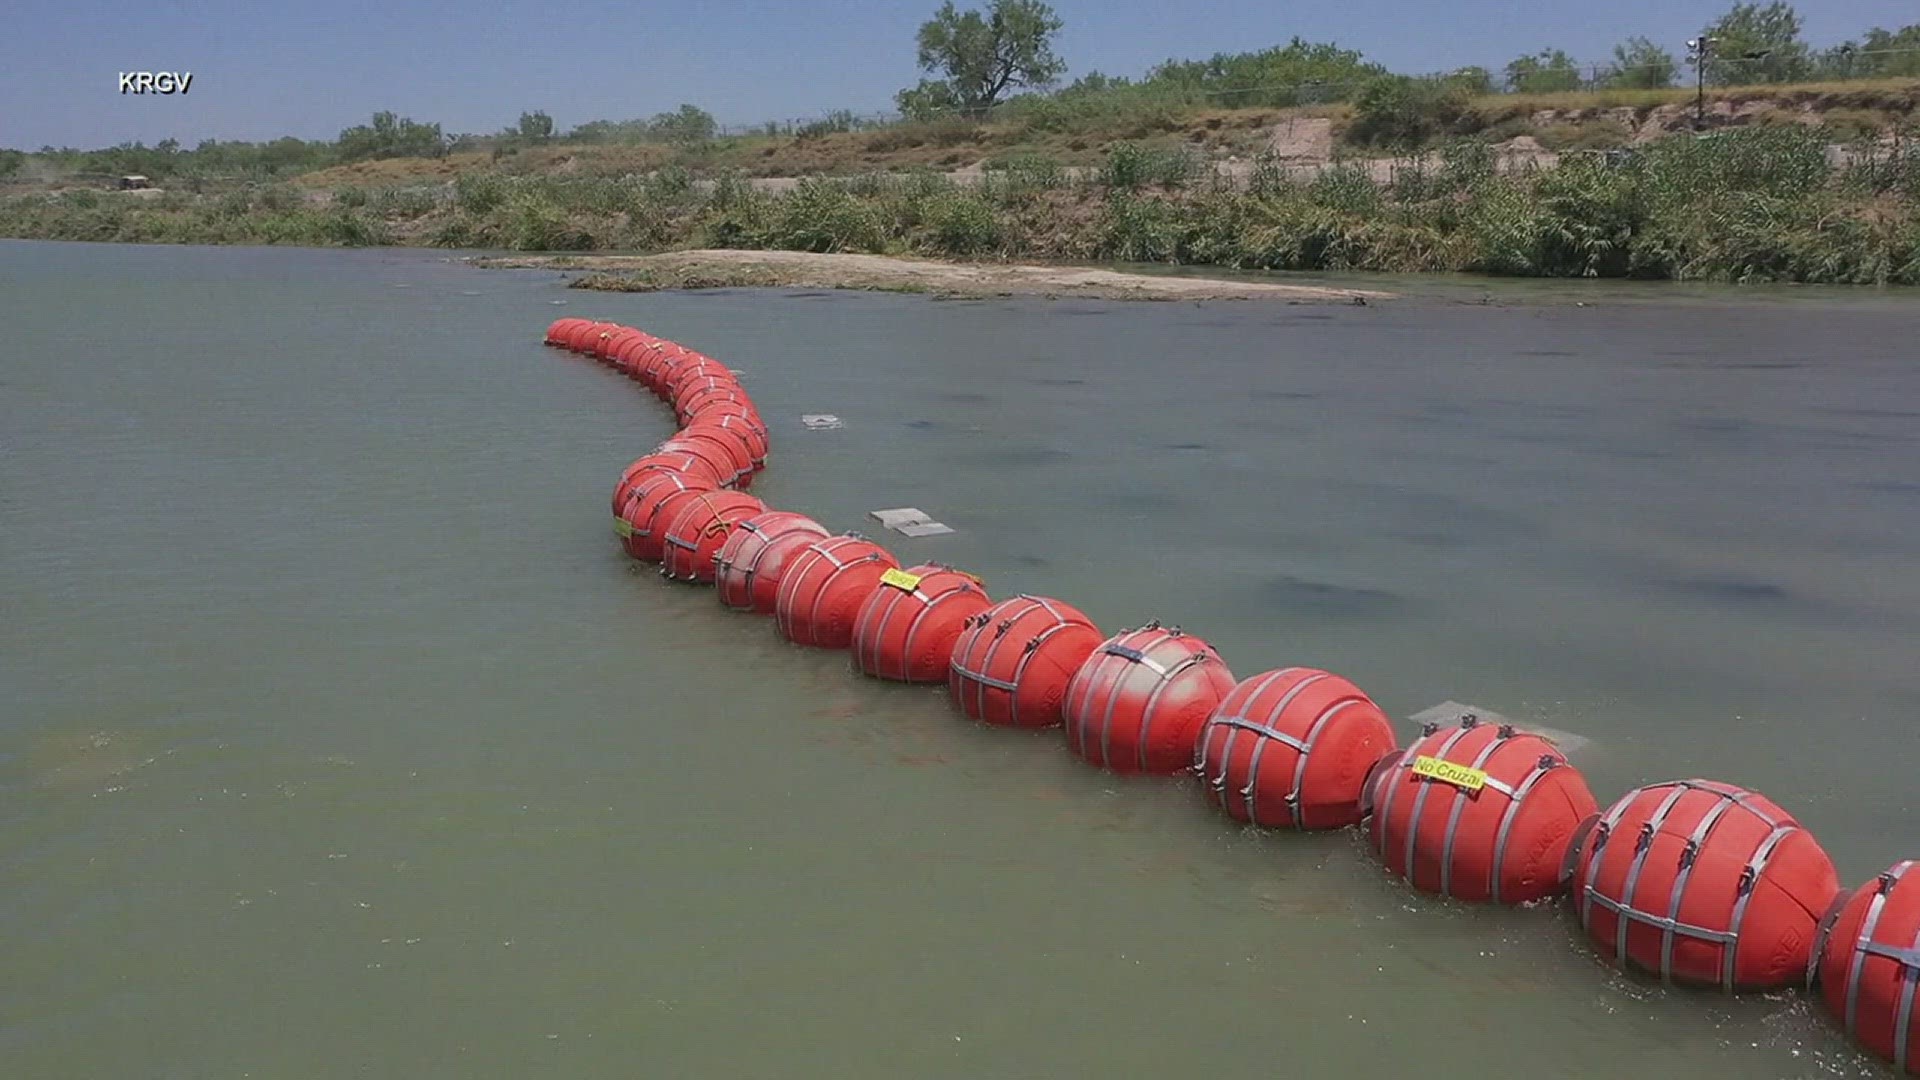 The lawsuit asks a court to force Texas to remove a roughly 1,000-foot line of bright orange, wrecking ball-sized buoys